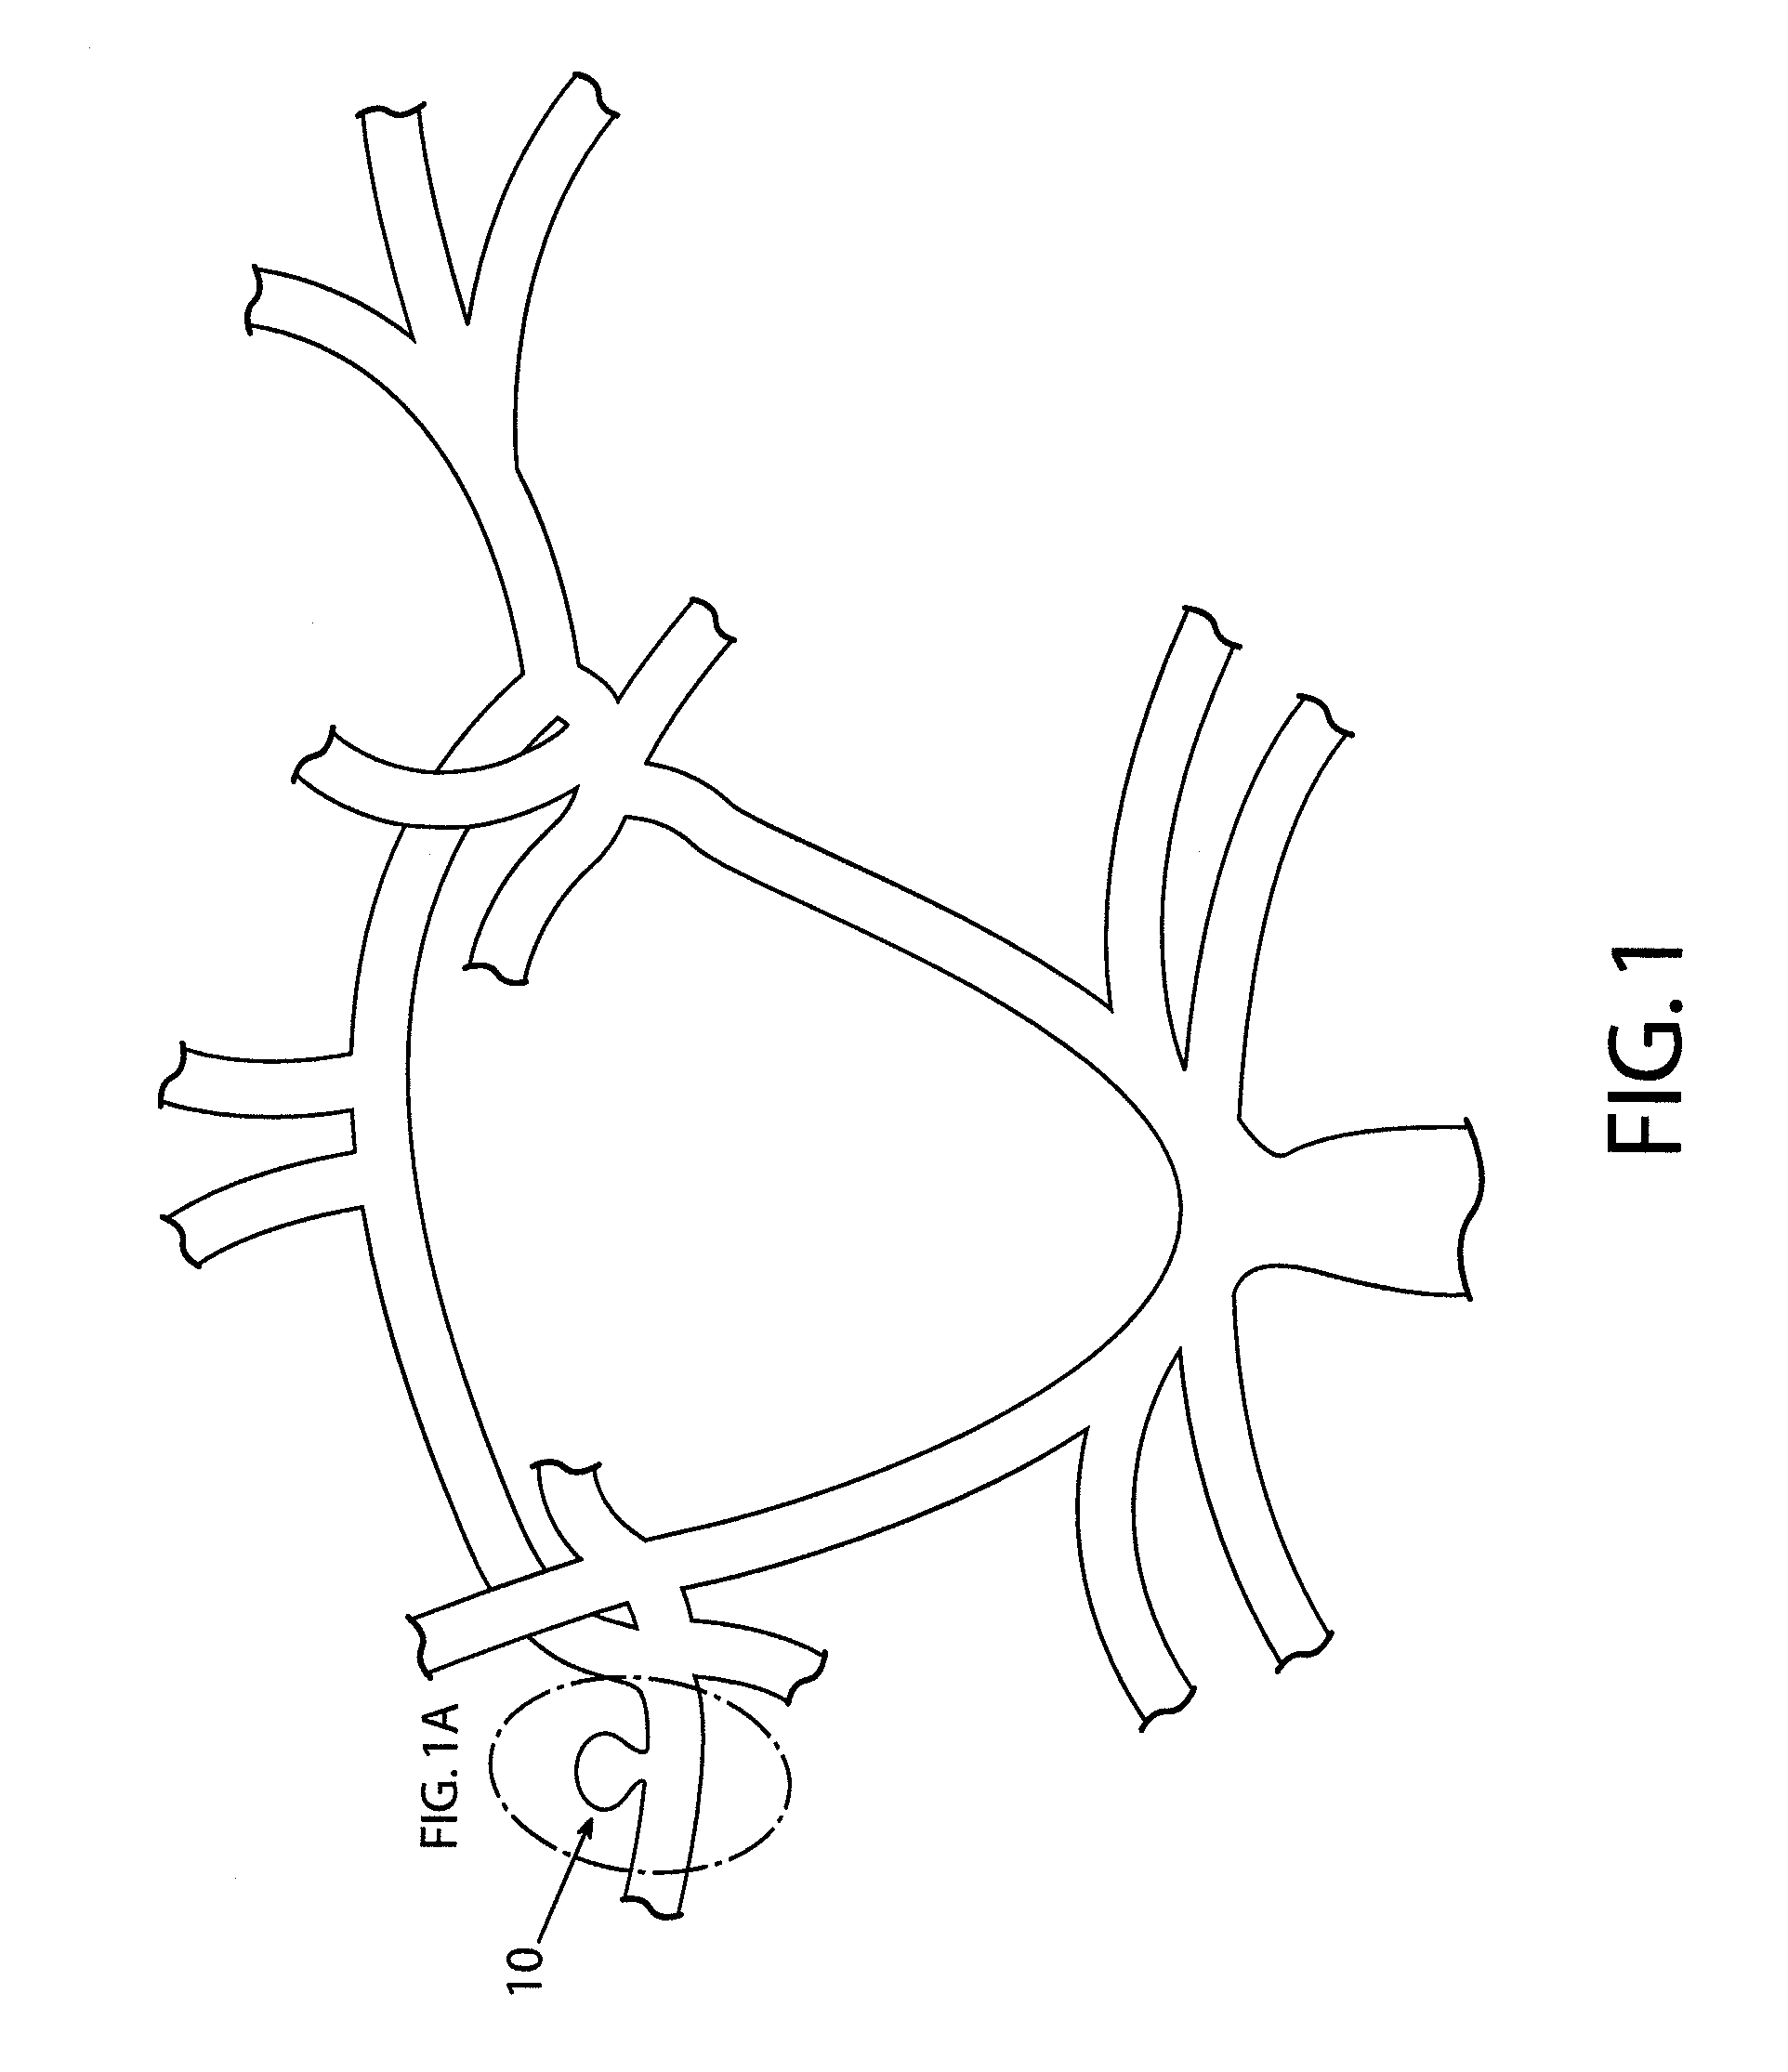 Devices and methods for occluding vascular abnormalities